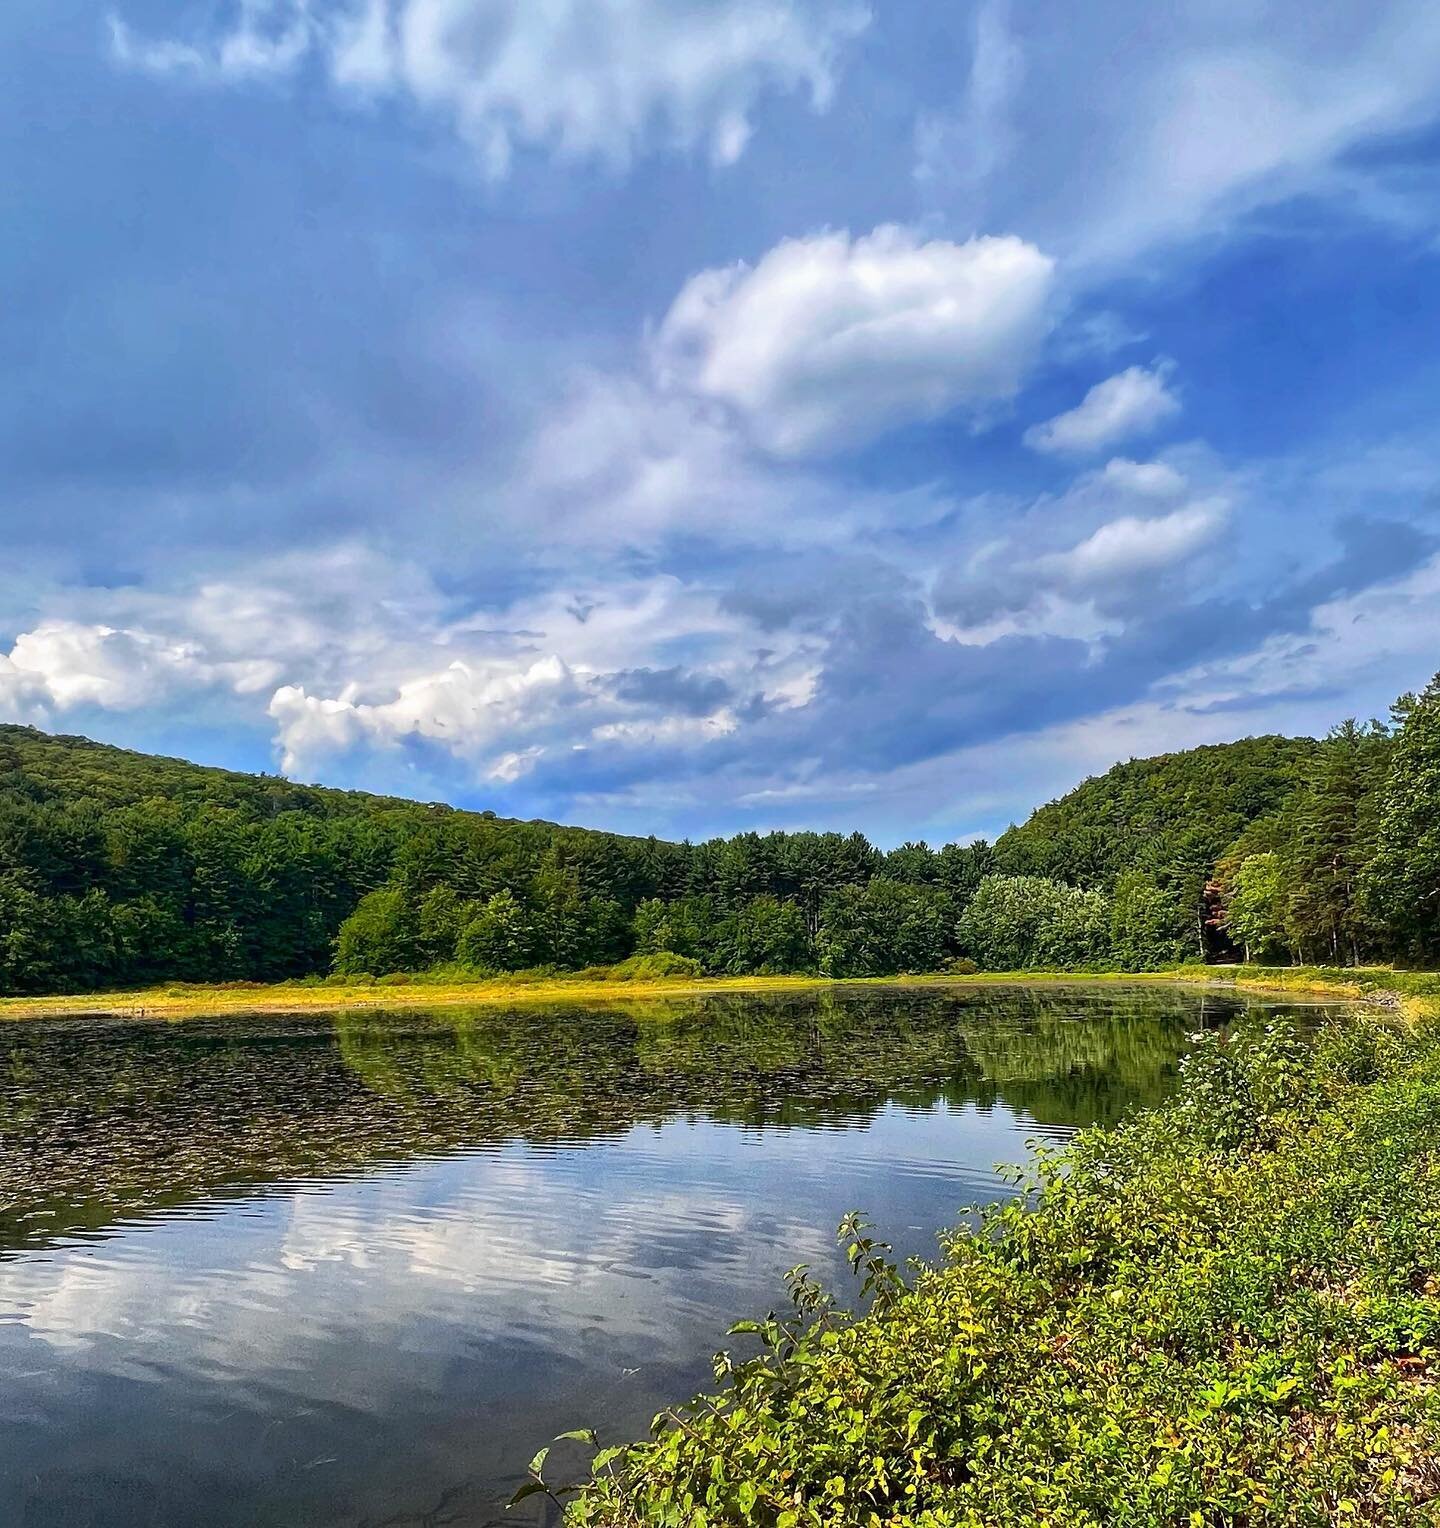 It&rsquo;s water weds. Ok that&rsquo;s not a thing.

@bestofholyoke and I are stoked to share these snaps from summer hikes around Whiting Street Reservoir at the base of Mount Tom in Holyoke, Massachusetts.

Which is your fav: 1) end of summer refle